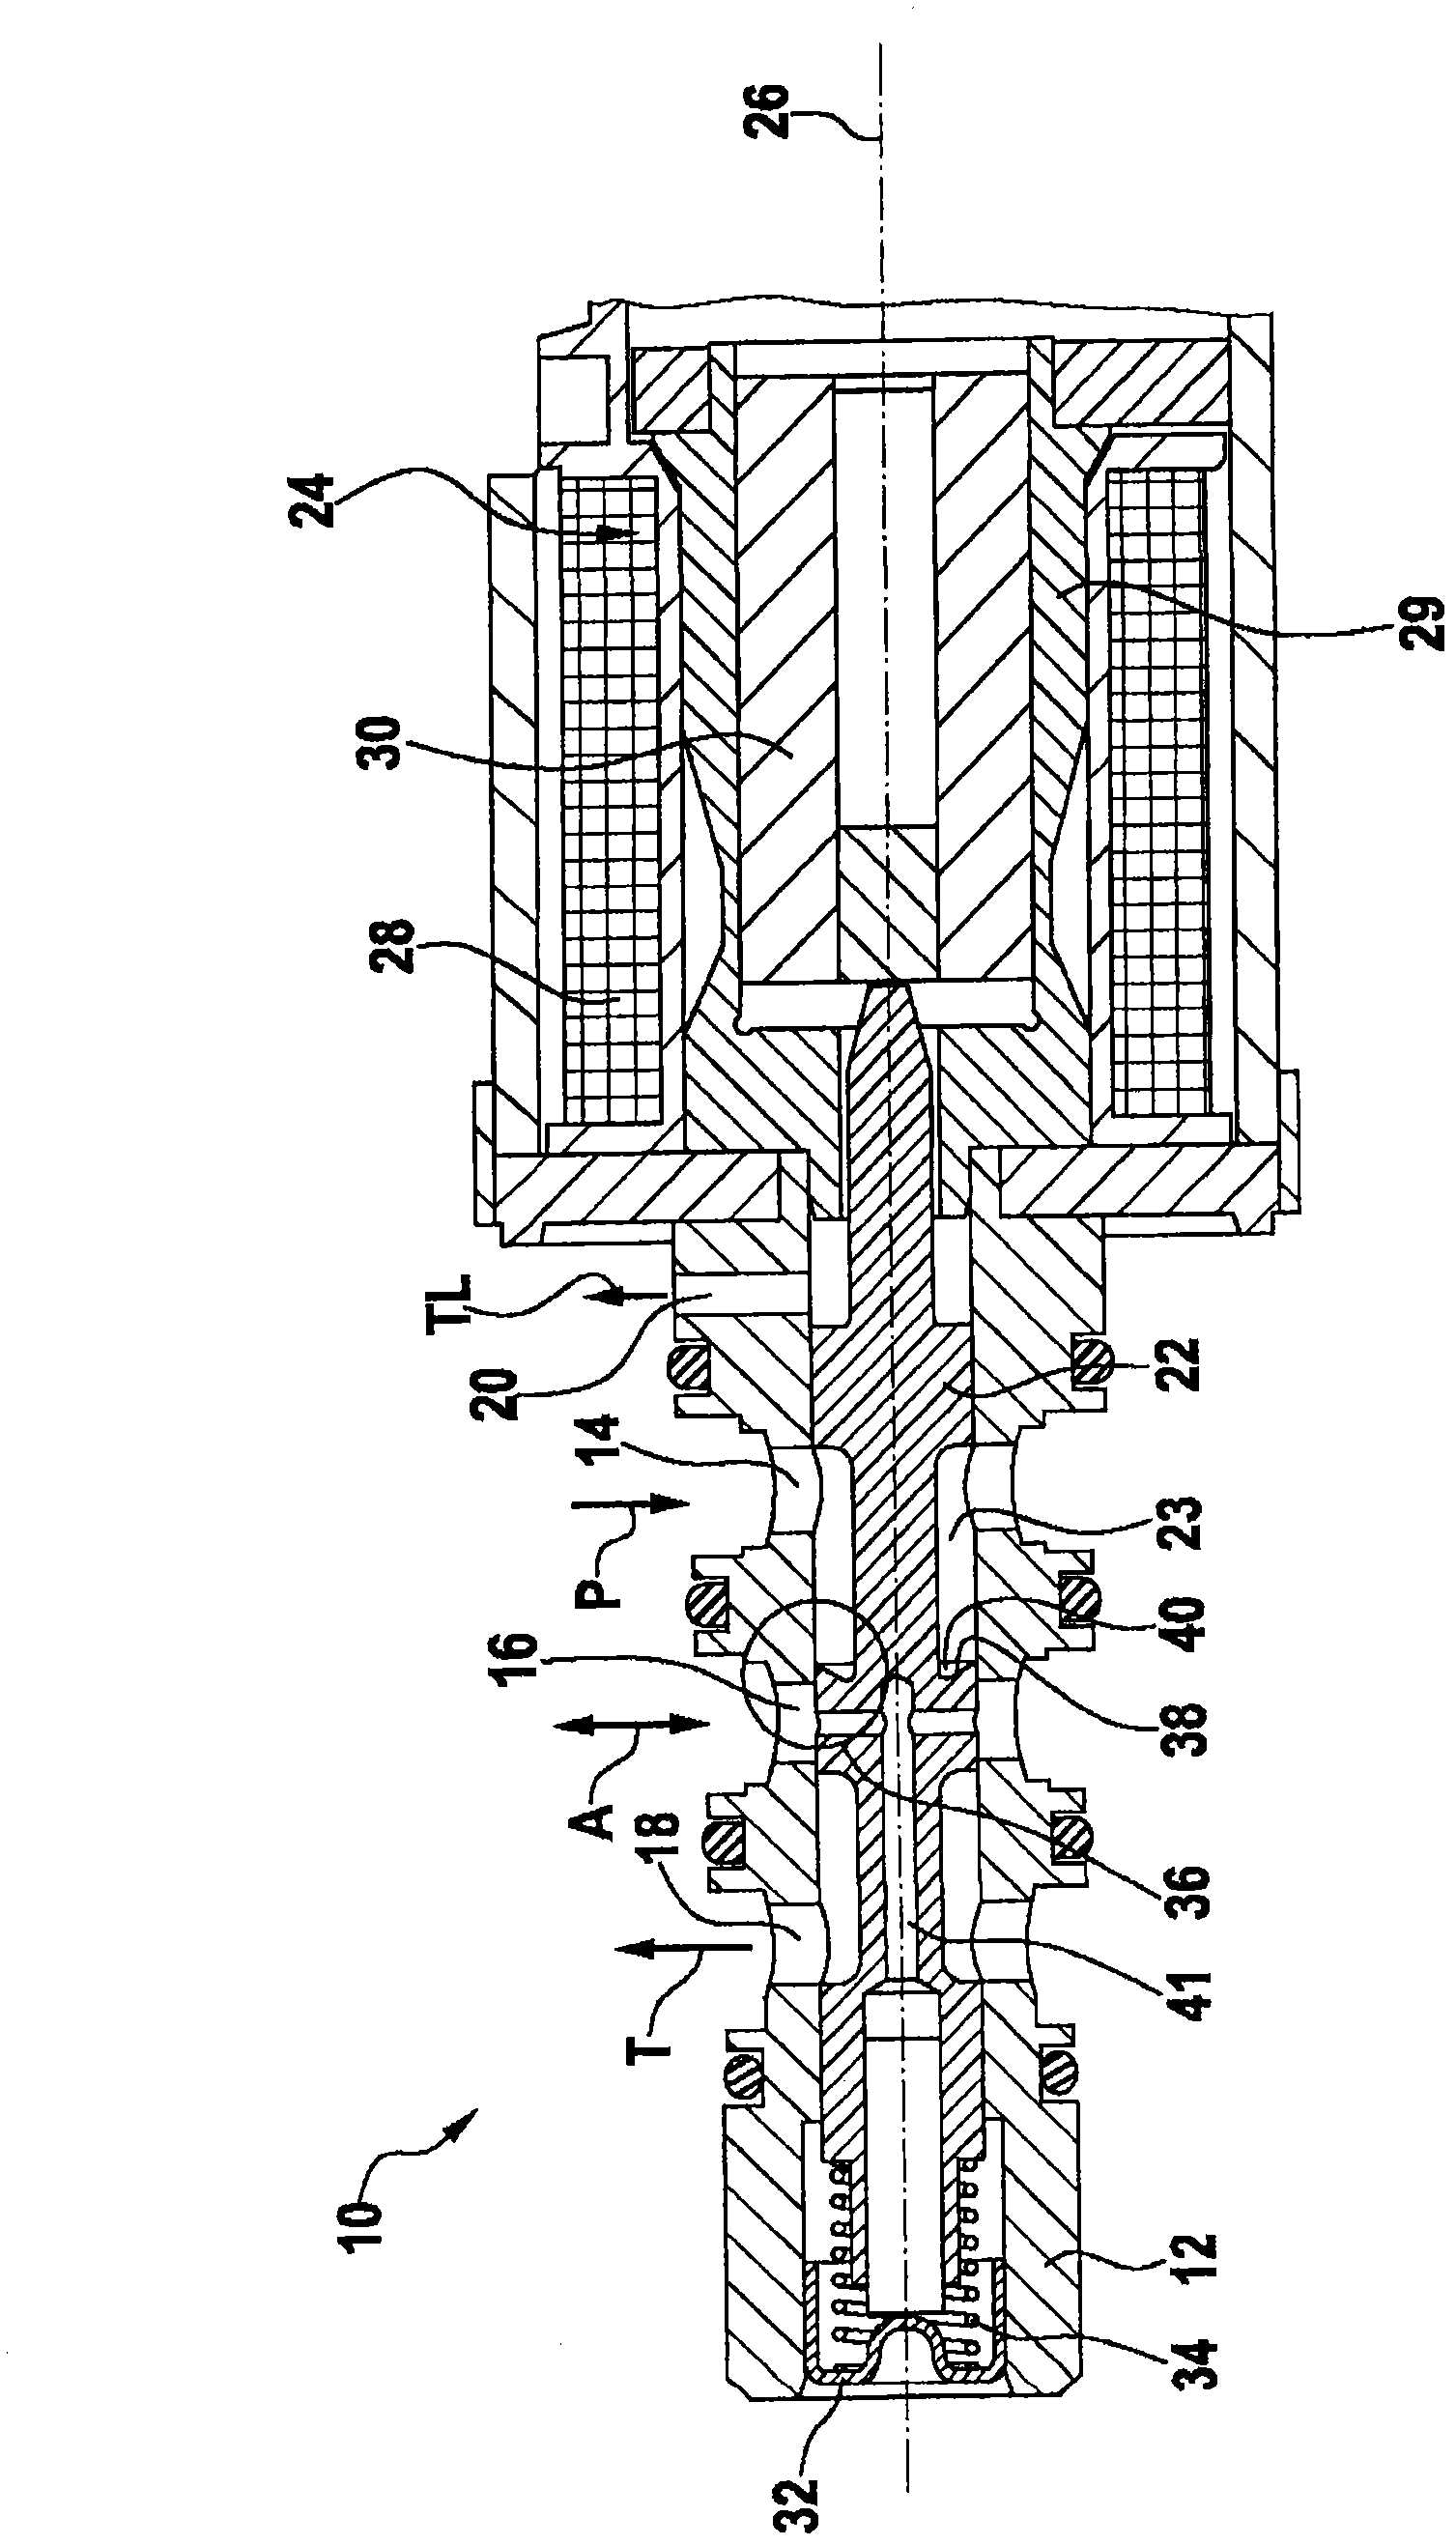 Pressure regulating valve, particularly for controlling a clutch in a motor vehicle automatic transmission